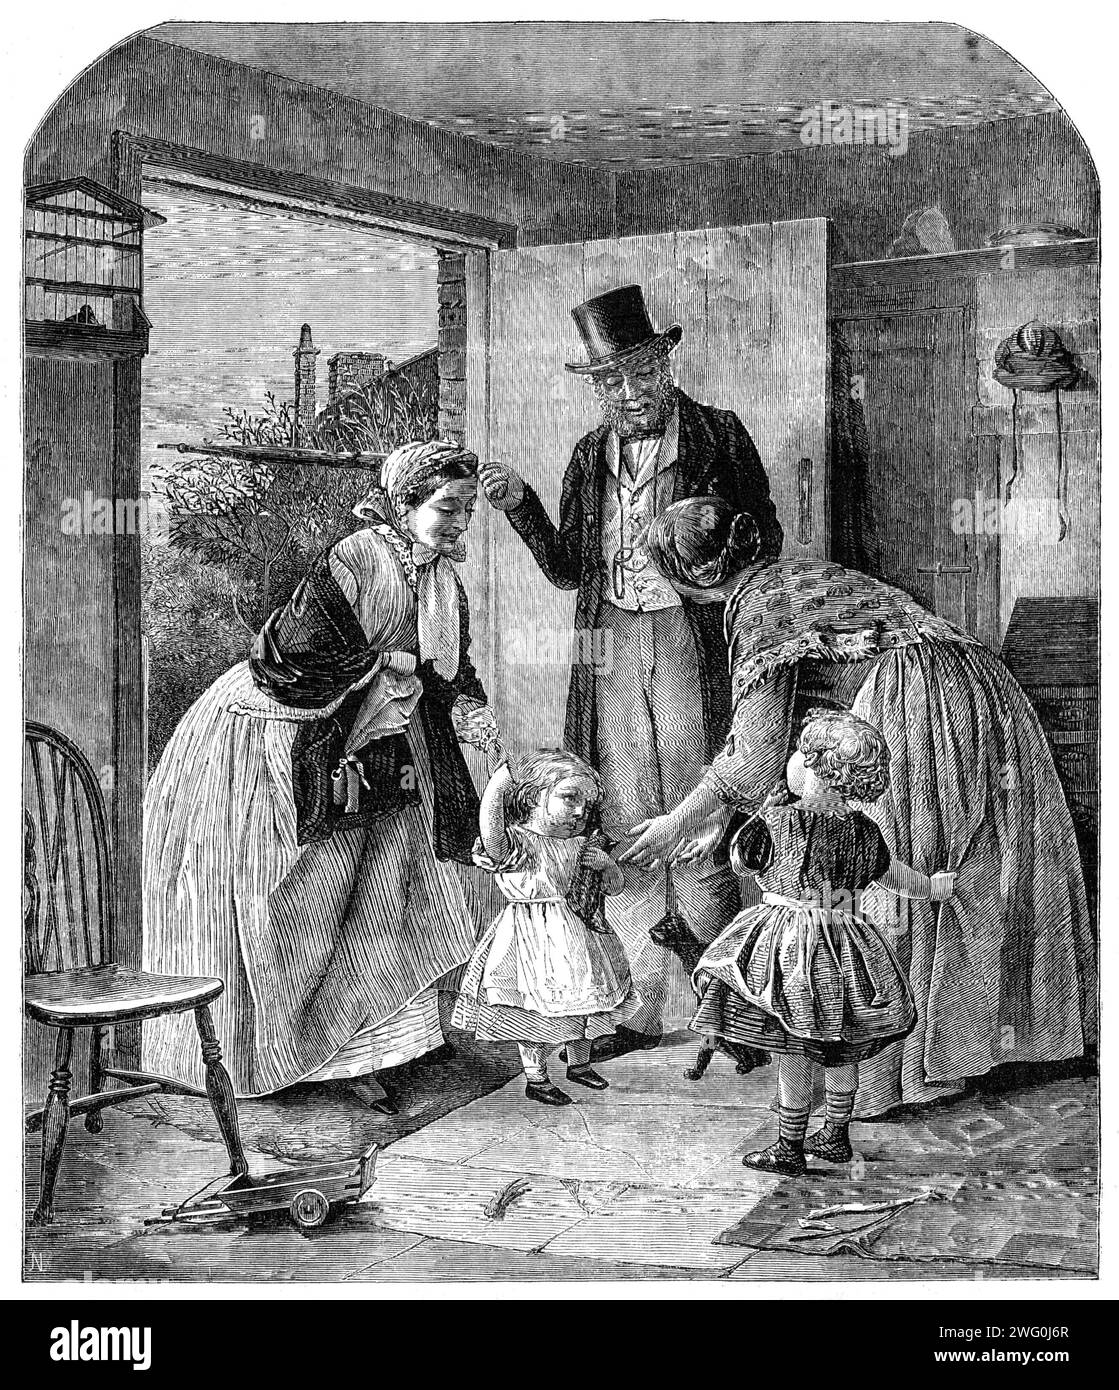 &quot;Restored&quot;, by J. Clark, 1862. Engraving of a painting. '...what charming studies of character are this father and daughter, going perhaps to, or coming from, church! If one could not see her amiable face, you could tell that the daughter is a sweet, unaffected, good-natured girl...Then, look at her father; what worth, what genuine English bonhomie there is in his face! He is advancing in life; his hair is iron-grey; but his heart is, beyond all doubt, still soft as wax, and he bears it openly as the simple wheat-ears he has plucked and placed in the buttonholes of his coat. Why, the Stock Photo